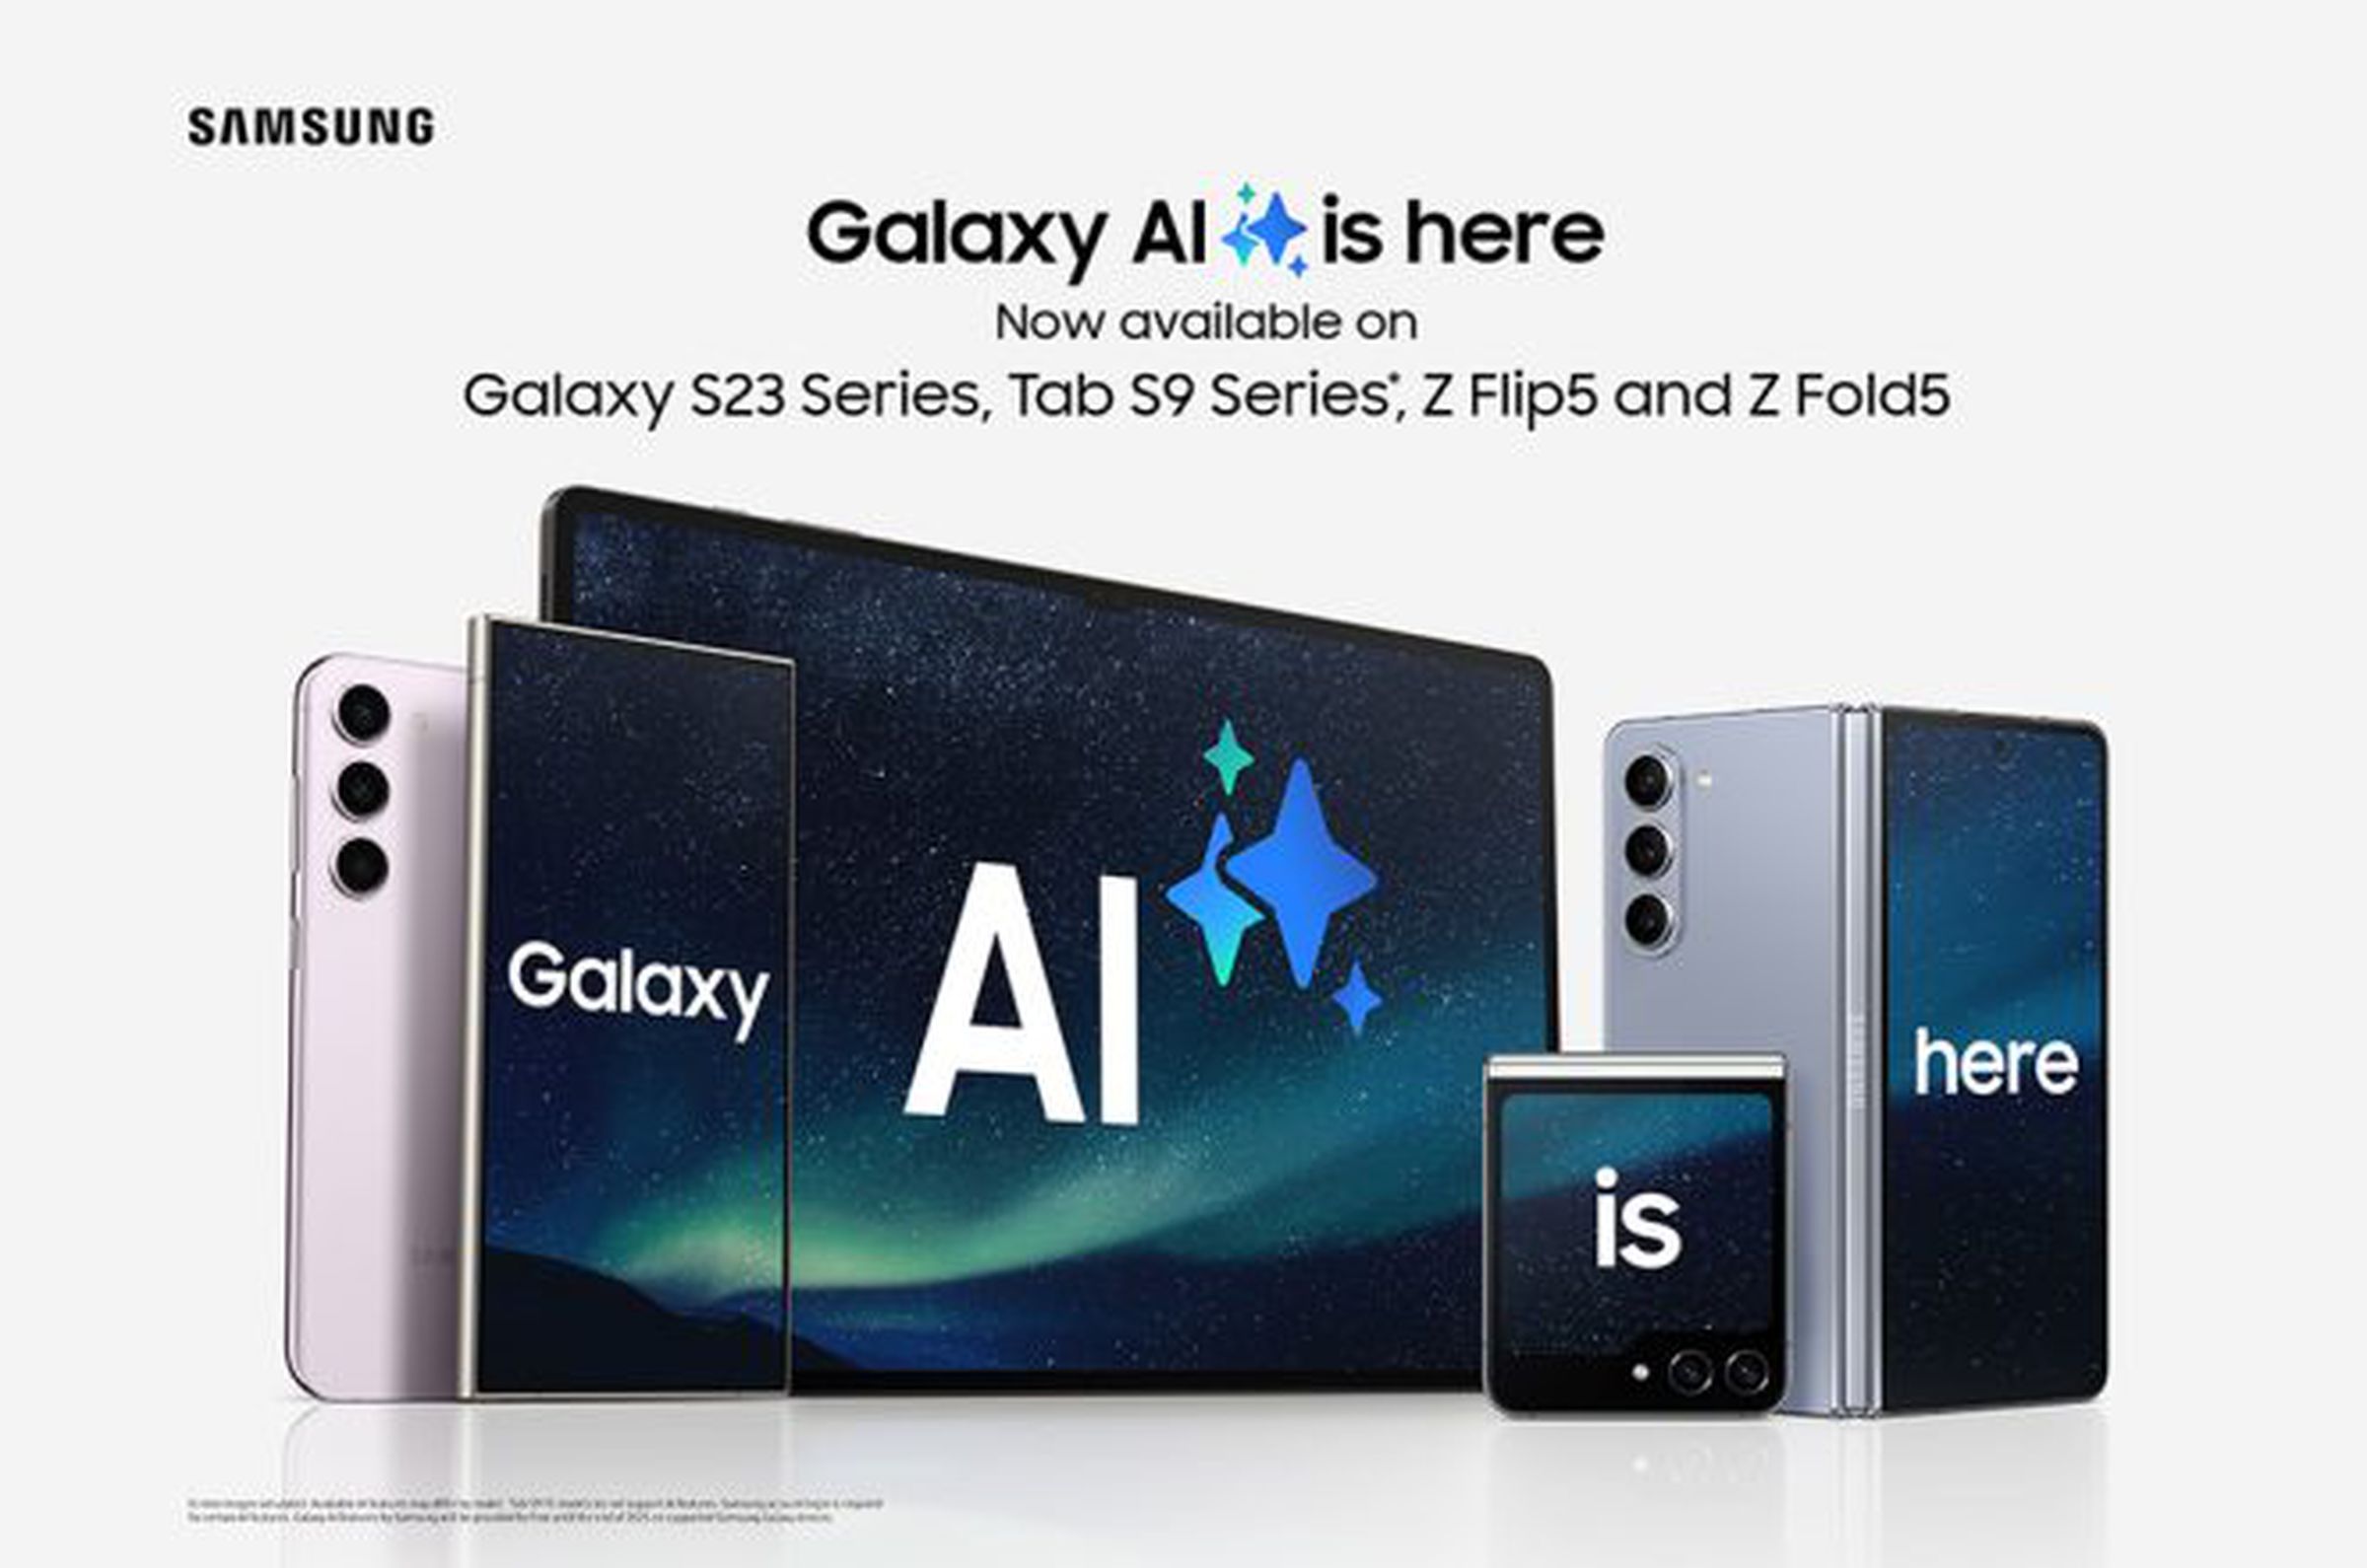 Samsung “Galaxy AI” promo image with phones and tablets that will receive the One UI 6.1 update.